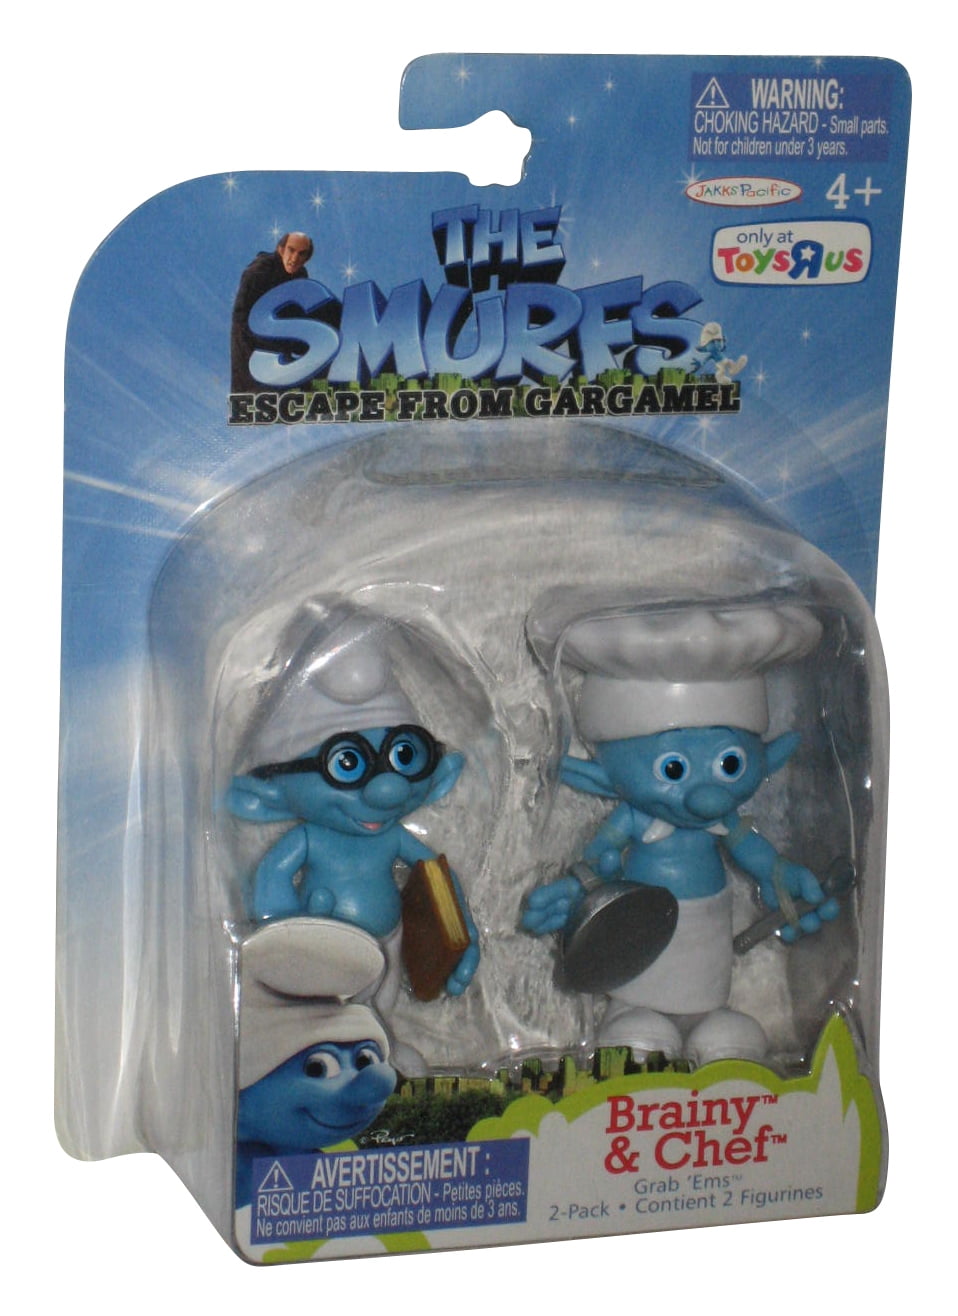 + 3 PCS KIDS UTENSILS *** New and Boxed + The Smurfs + Smurf ** 